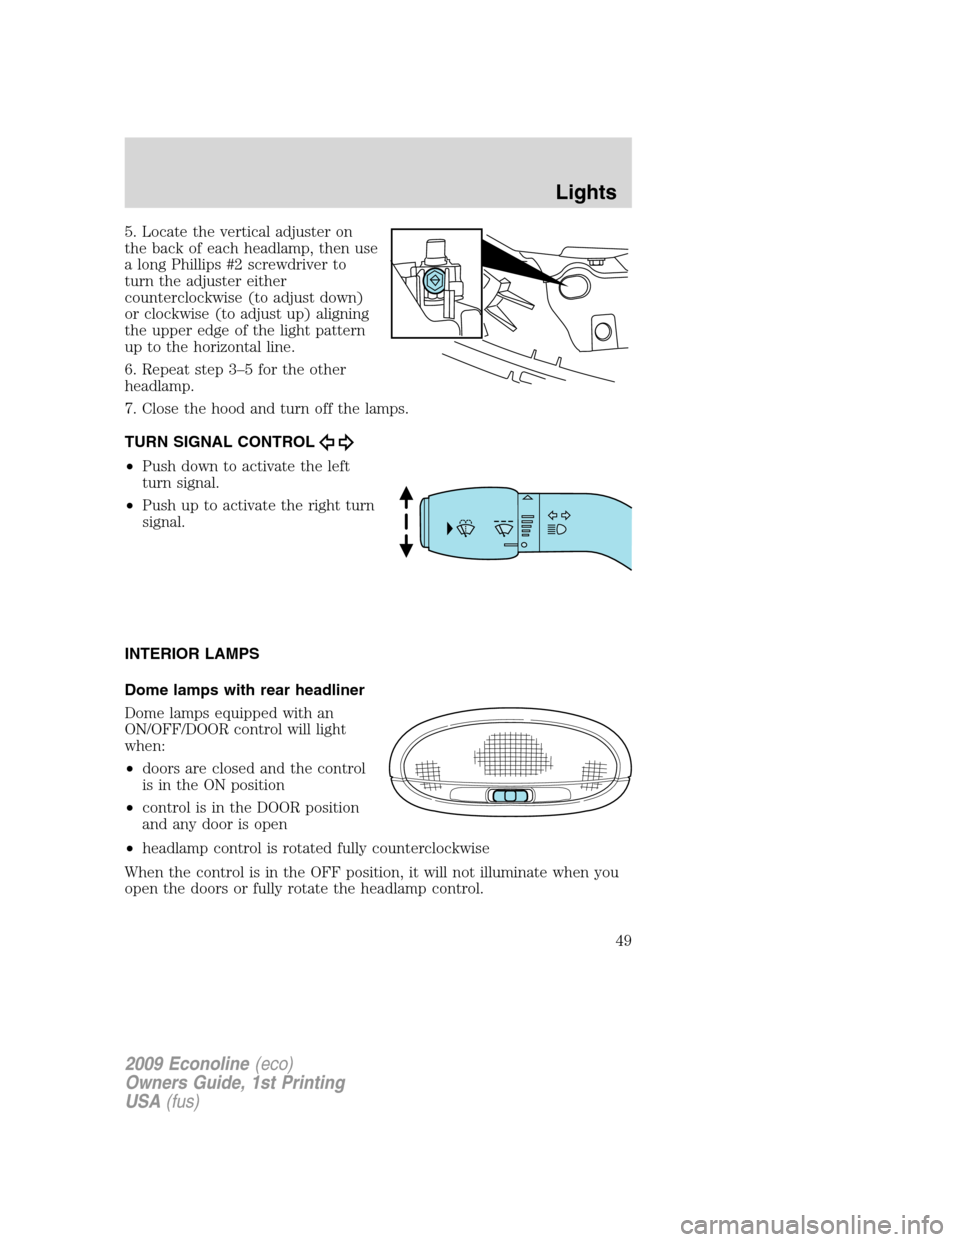 FORD E SERIES 2009 4.G Owners Manual 5. Locate the vertical adjuster on
the back of each headlamp, then use
a long Phillips #2 screwdriver to
turn the adjuster either
counterclockwise (to adjust down)
or clockwise (to adjust up) aligning